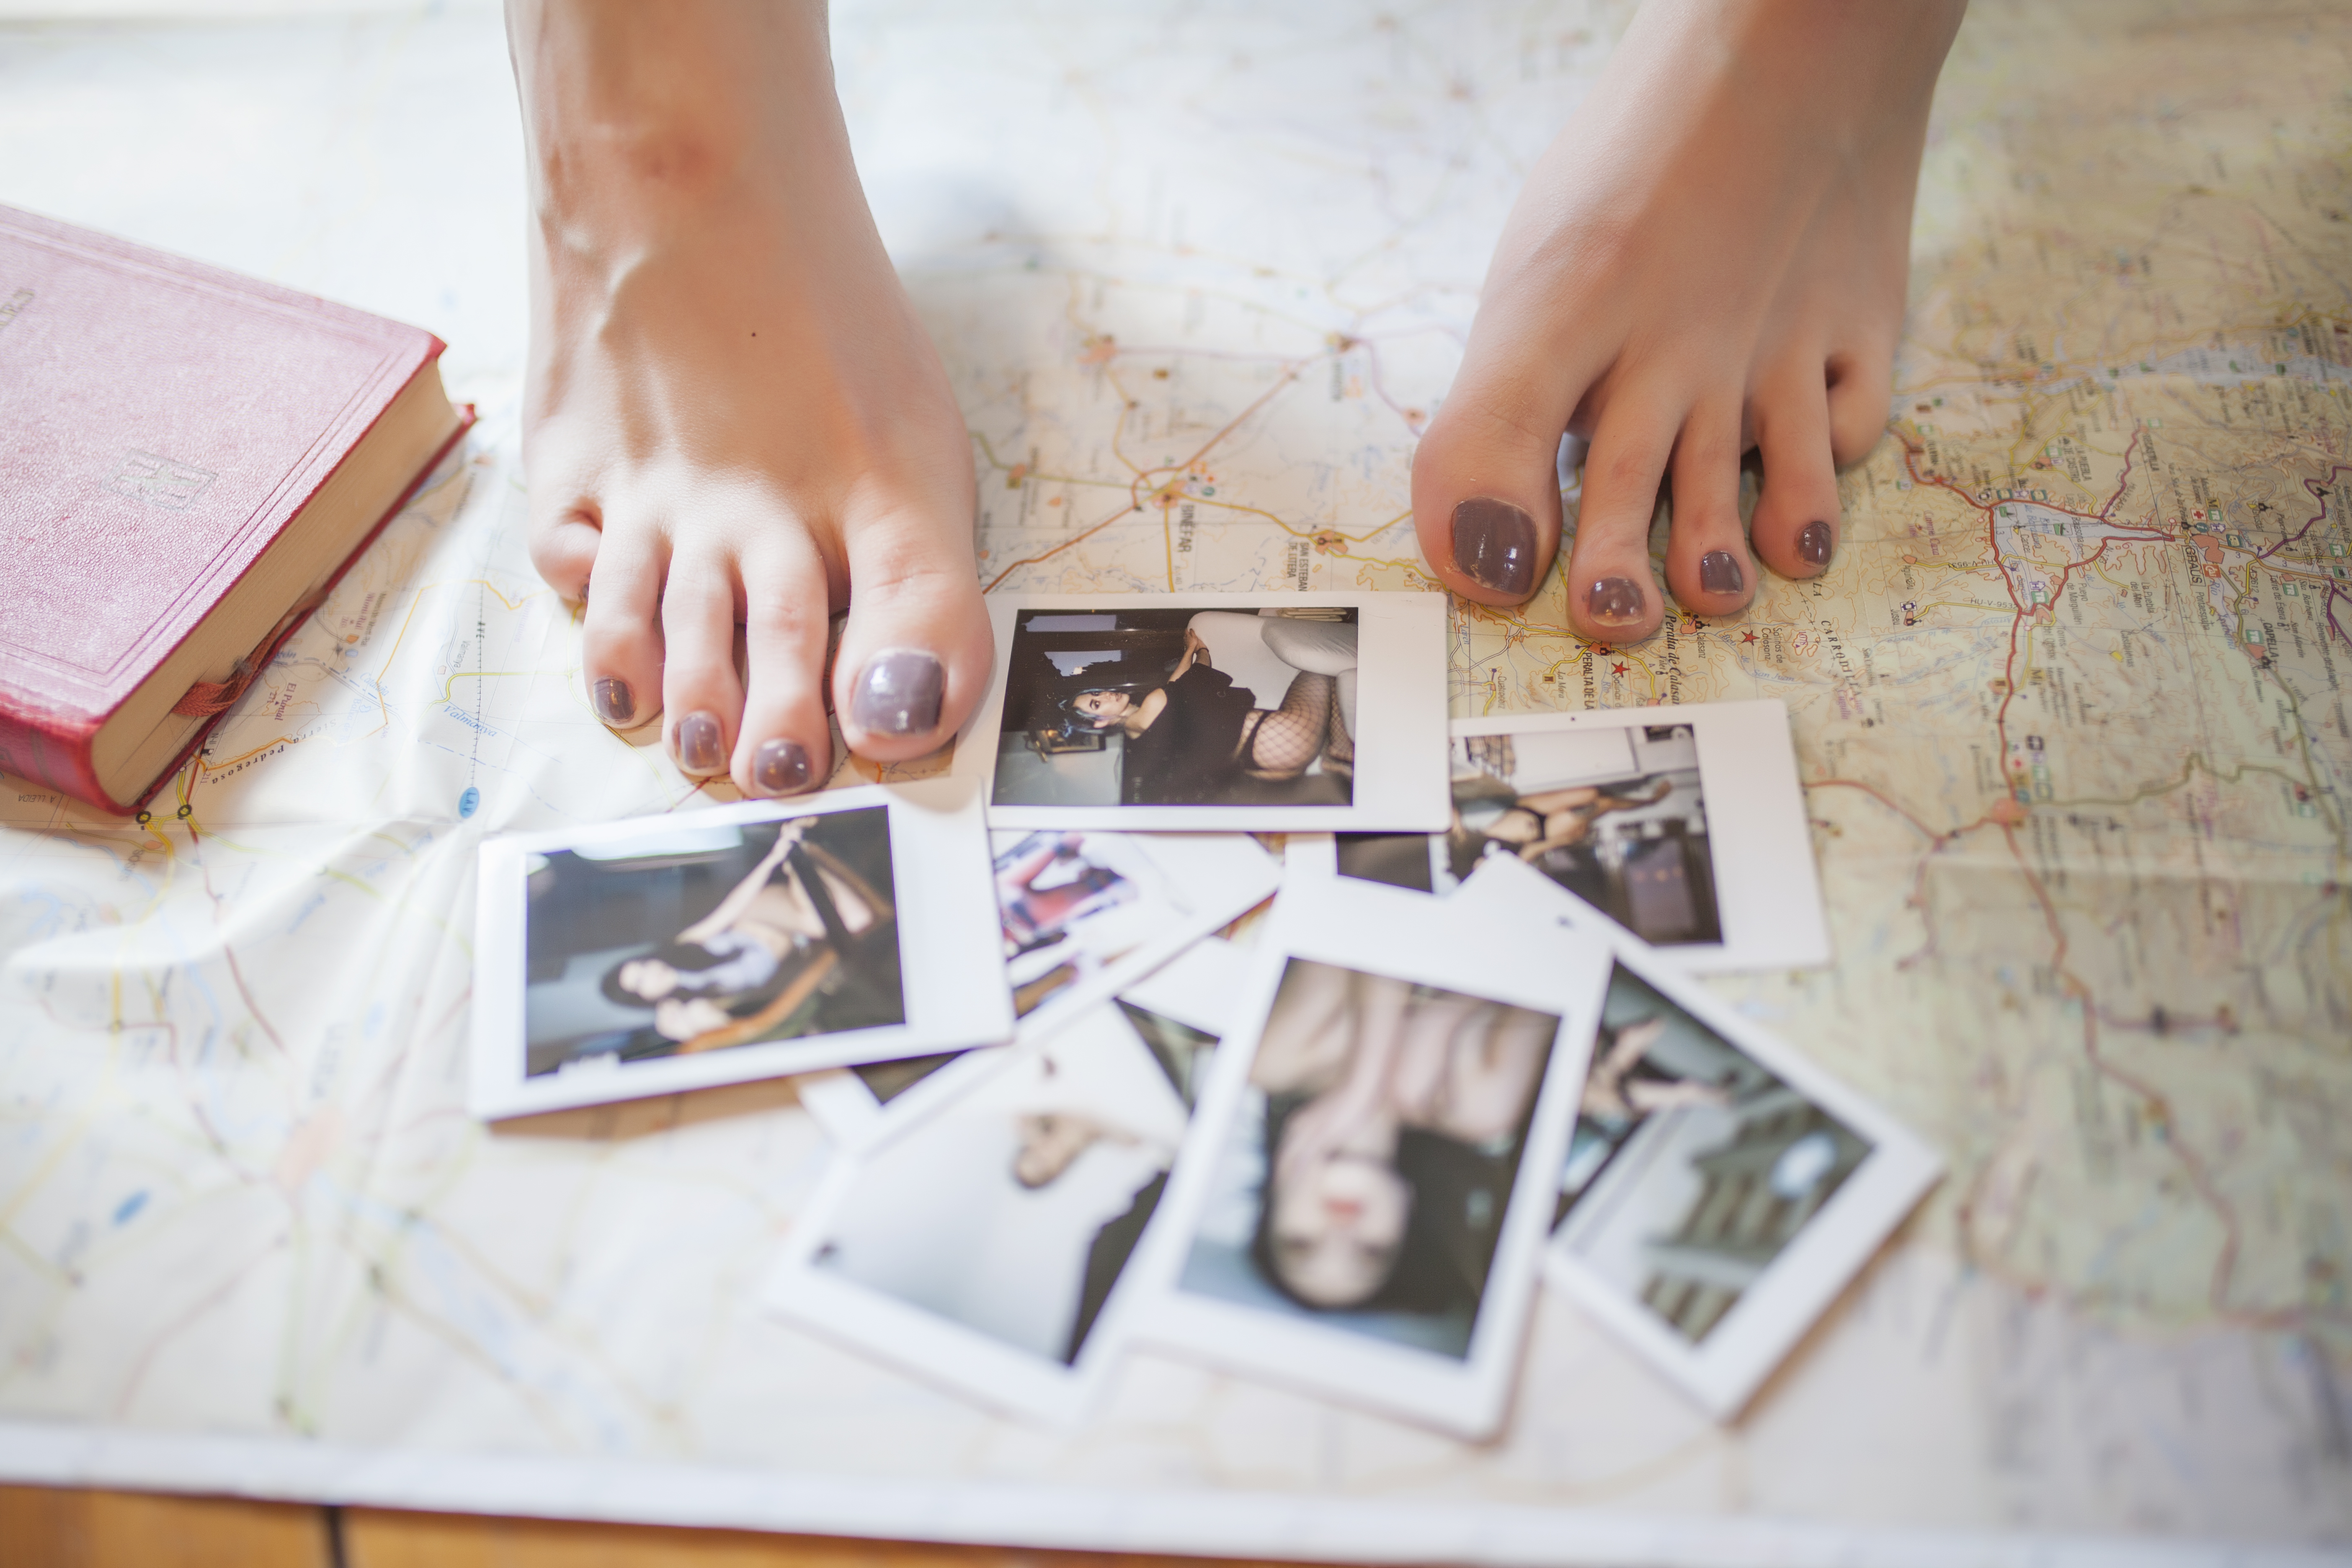 Women Model Photography Photographer Depth Of Field Books Picture Closeup Map Feet Violet Nails 5616x3744